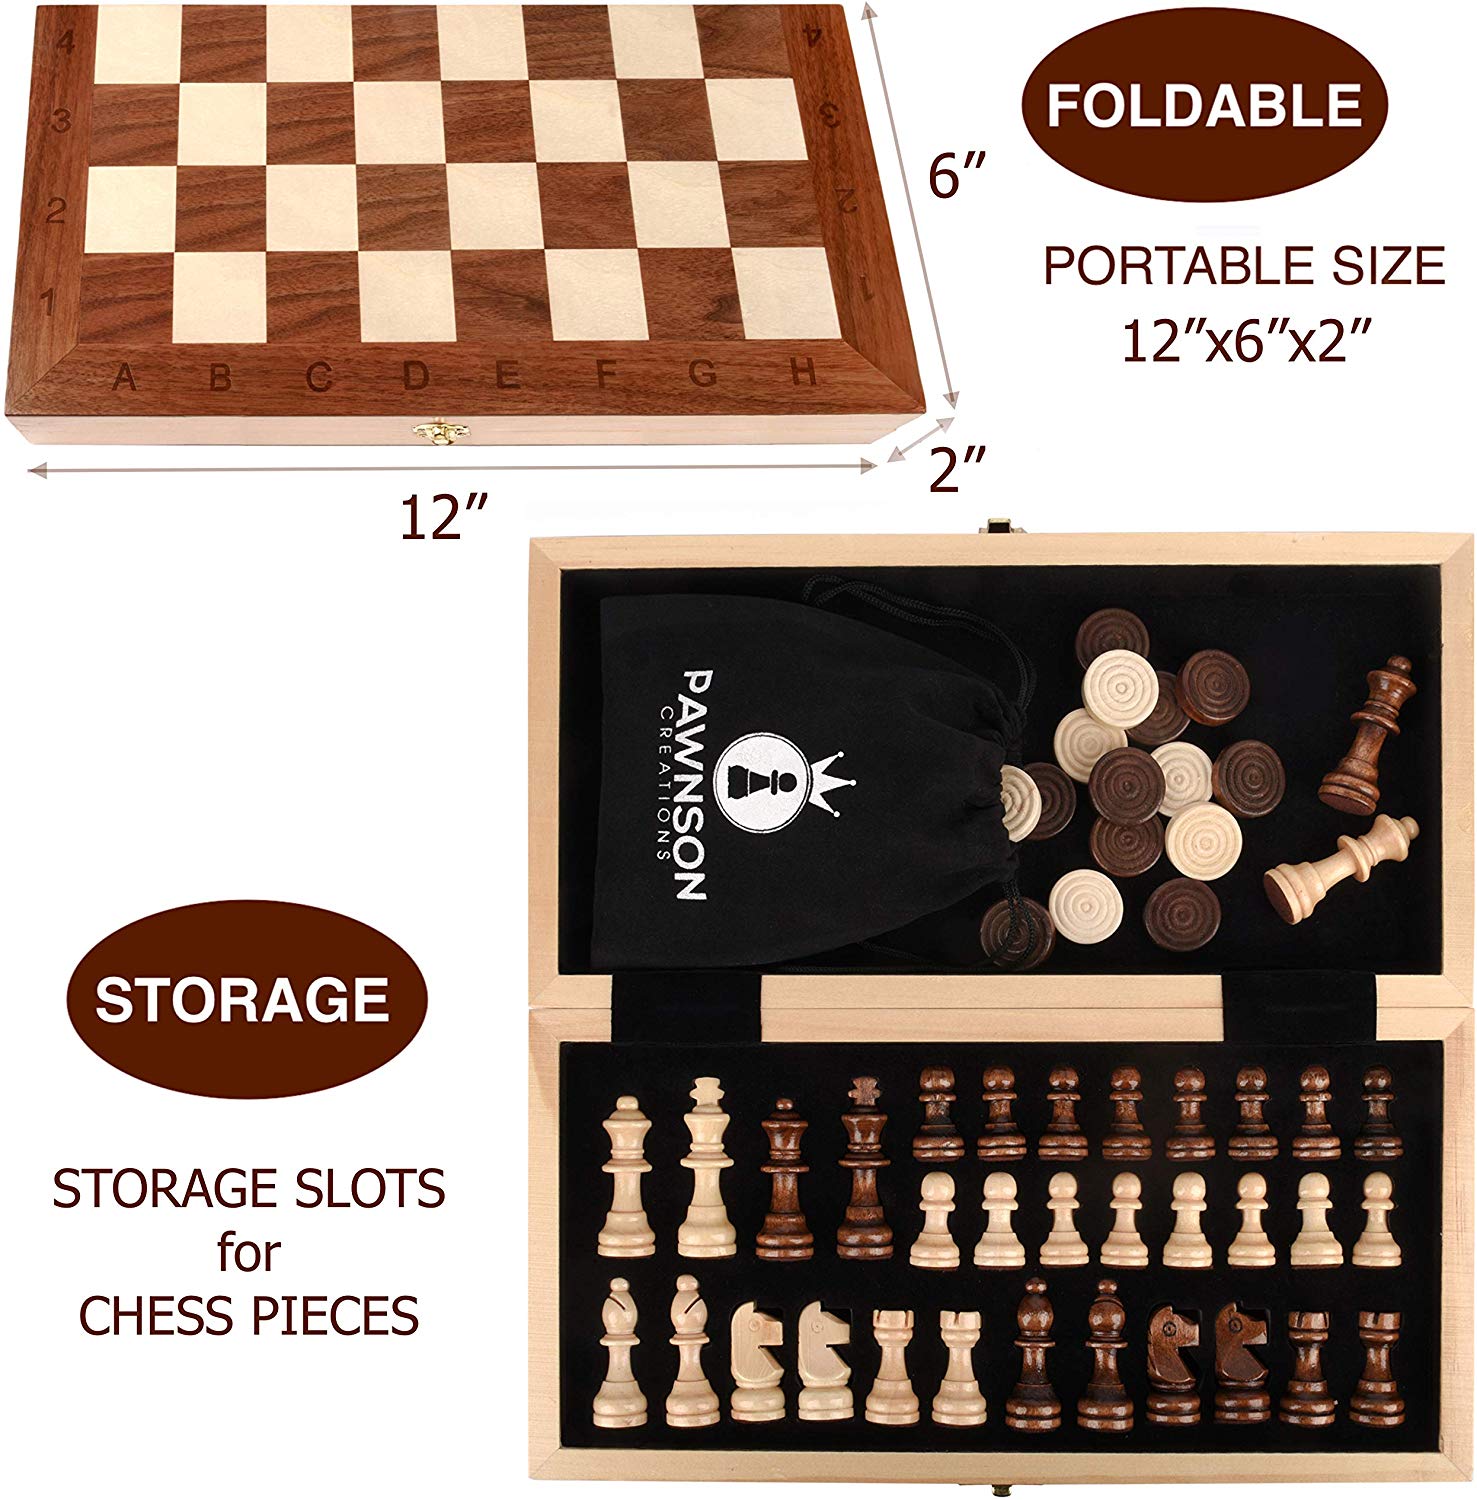 AMEROUS 15 Inches Magnetic Wooden Chess Set - 2 Extra Queens - Folding  Board - Pieces Storage Slots, Handmade Portable Travel Chess Game -  Beginner